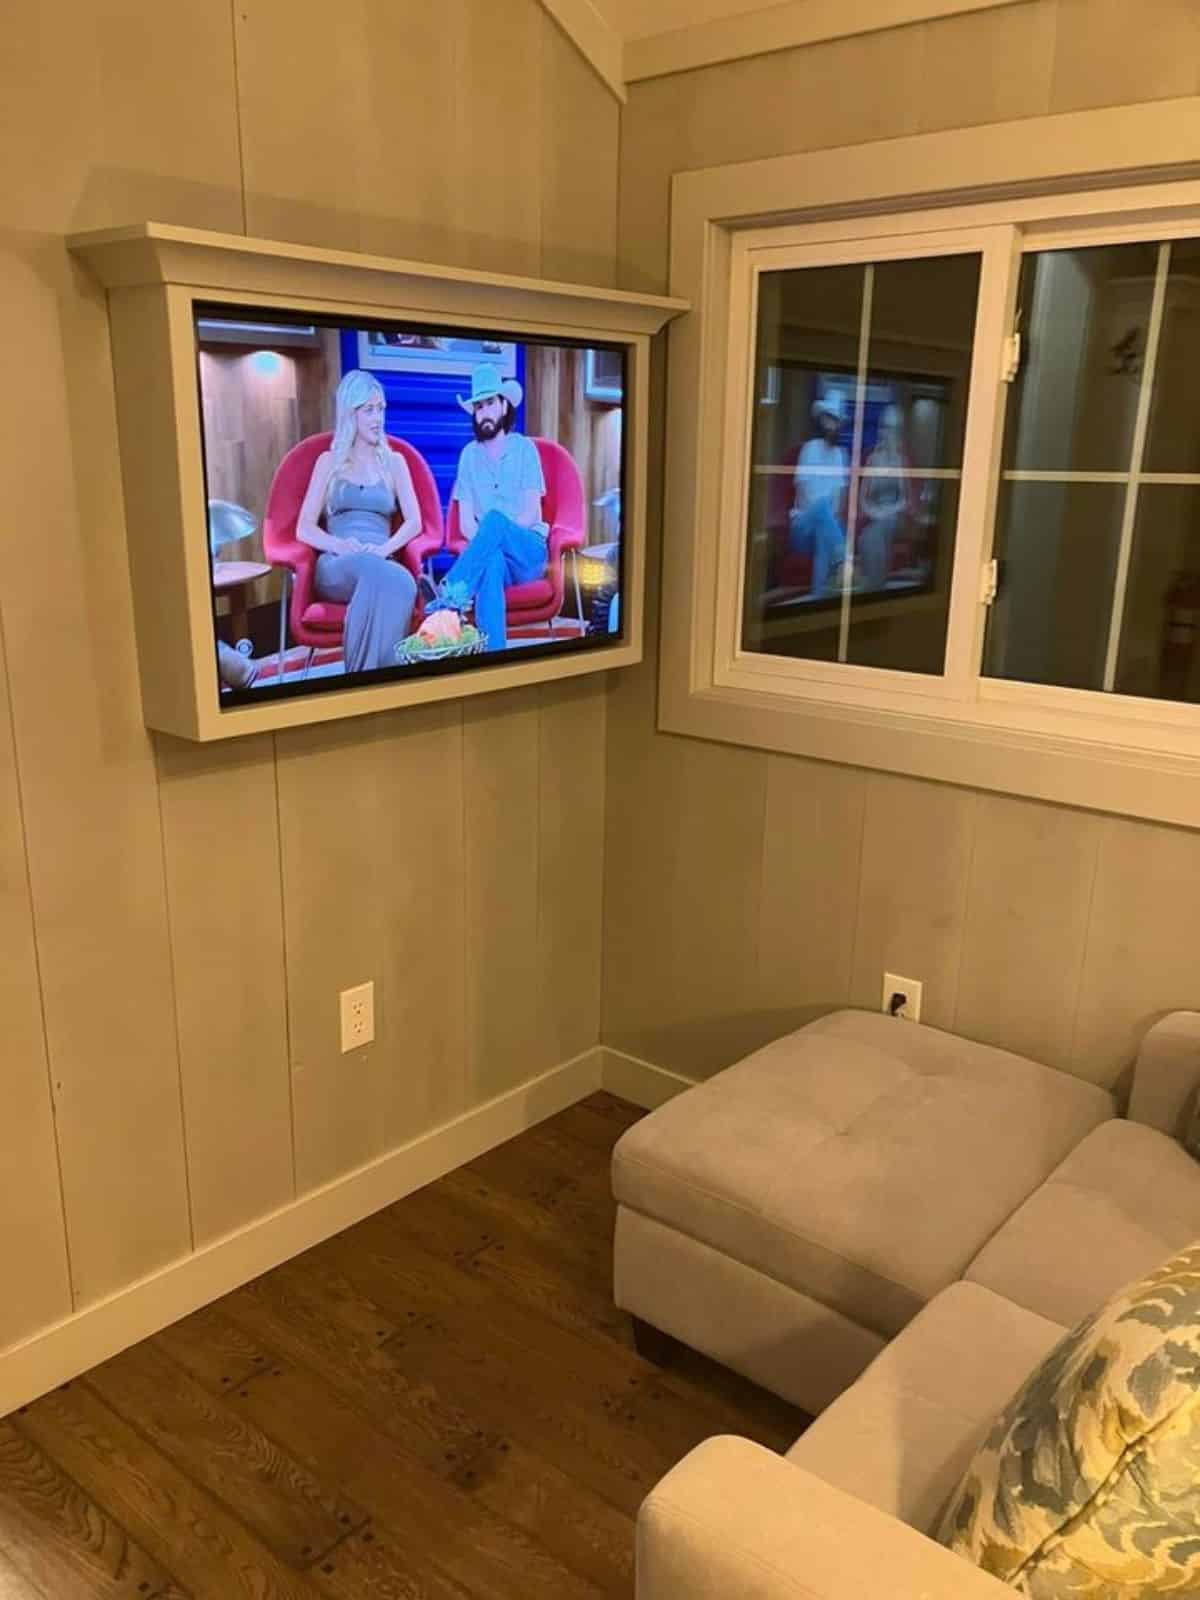 wall mounted TV set in front of the couch